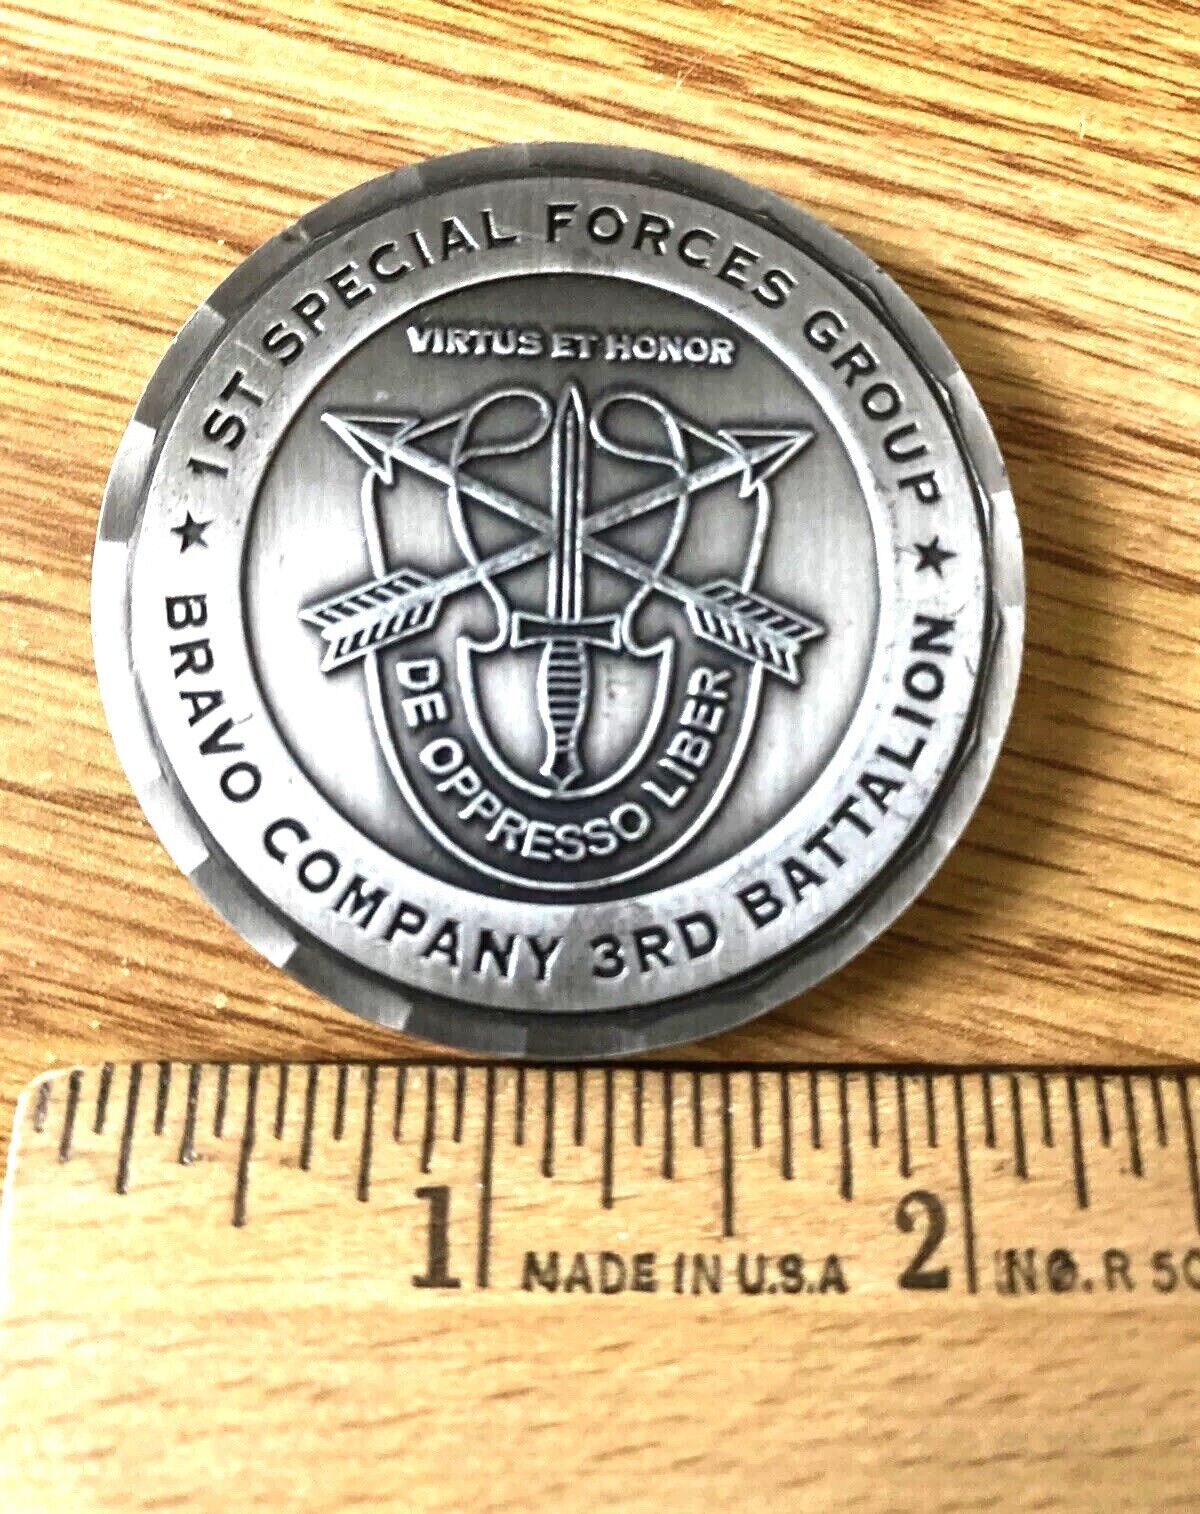 IRAQ WAR SPECIAL FORCES OIF IV B 3/1 AOB 180 1st SFG CHALLENGE COIN All ODA 2006